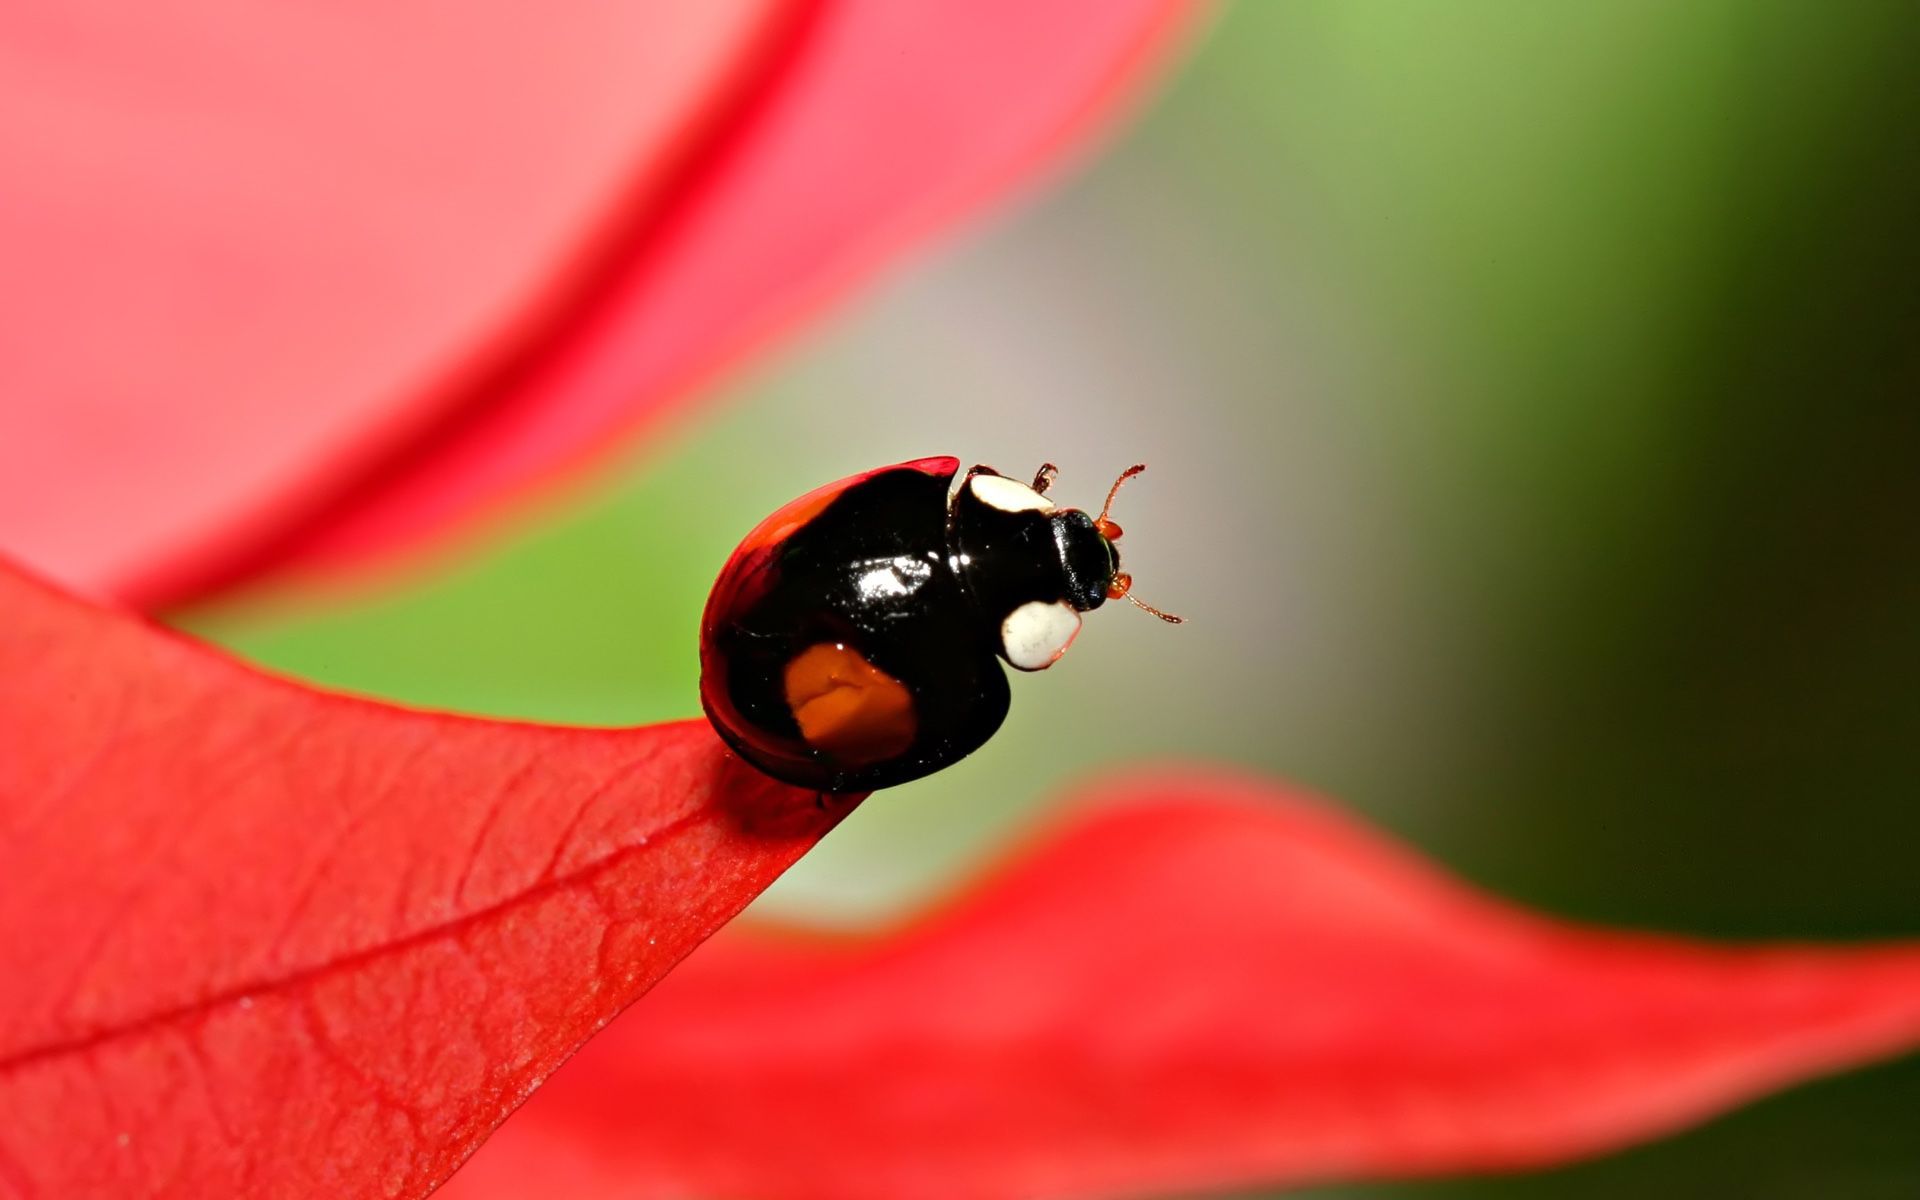 Free Wallpaper Background with Black Ladybug Picture in Macro | HD ...